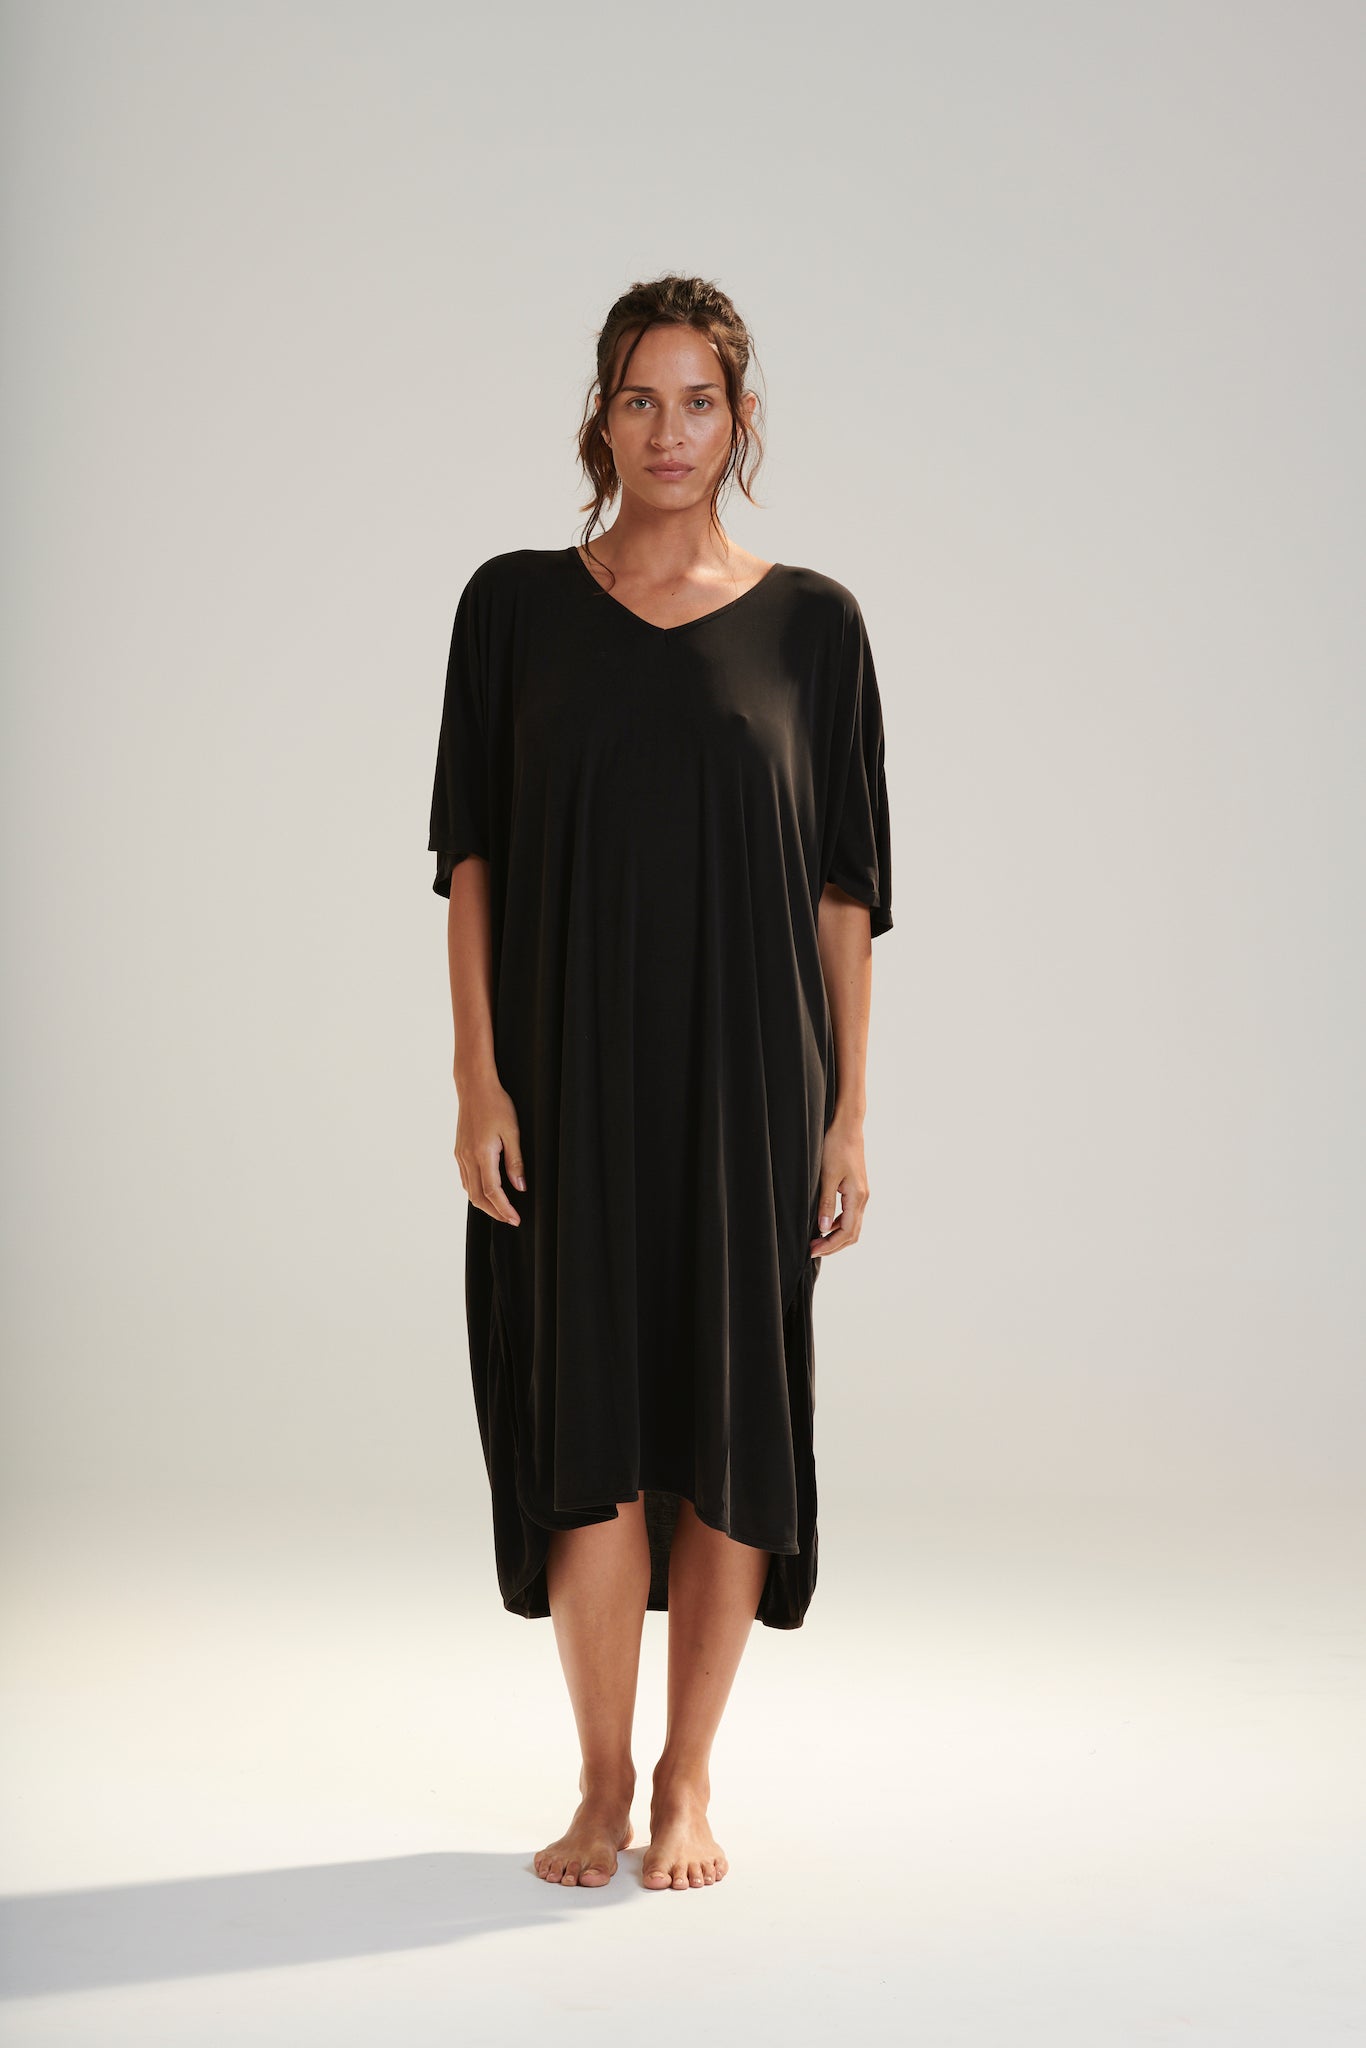 THALIA DRESS BEECHWOOD MODAL WITH WRAP TIE AND HEM SPLITS DARK WASHED BLACK FRONT VIEW COMES WITH REMOVABLE TIE